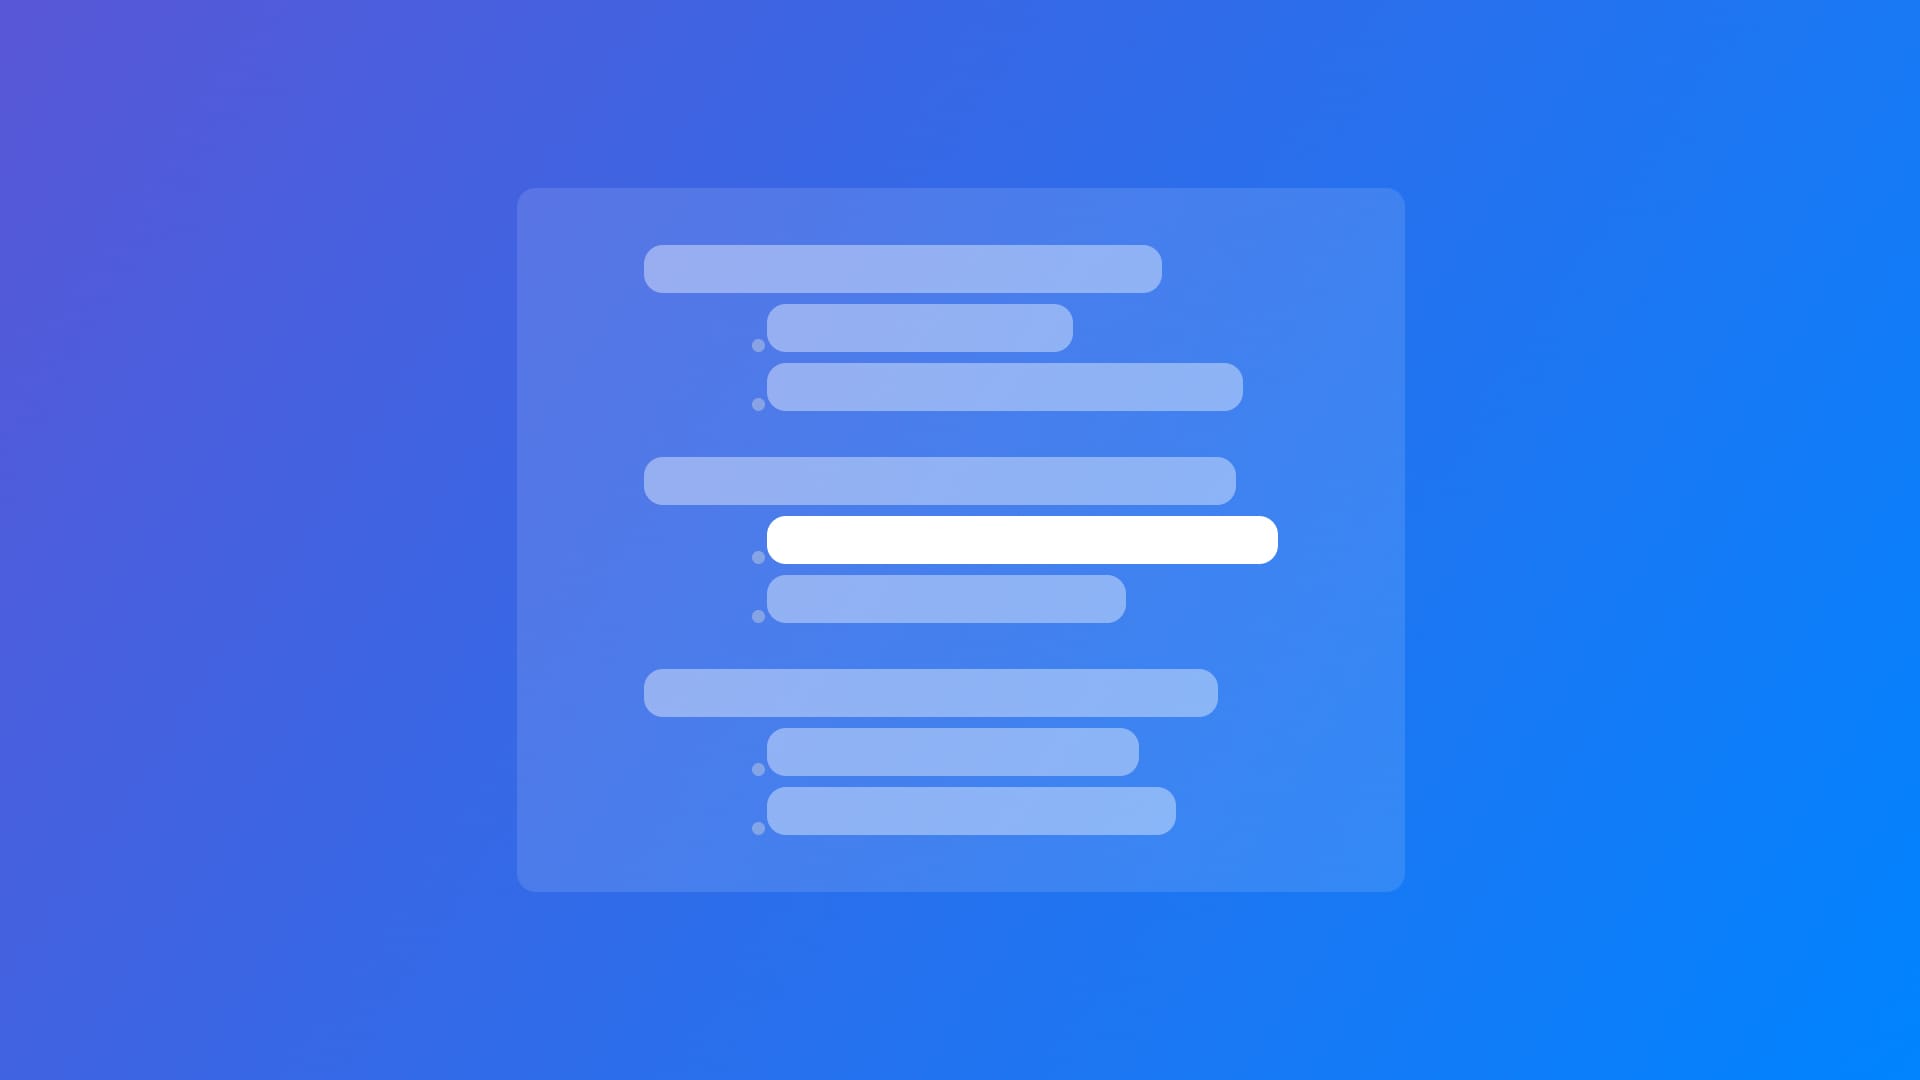 Creating a custom view modifier in SwiftUI